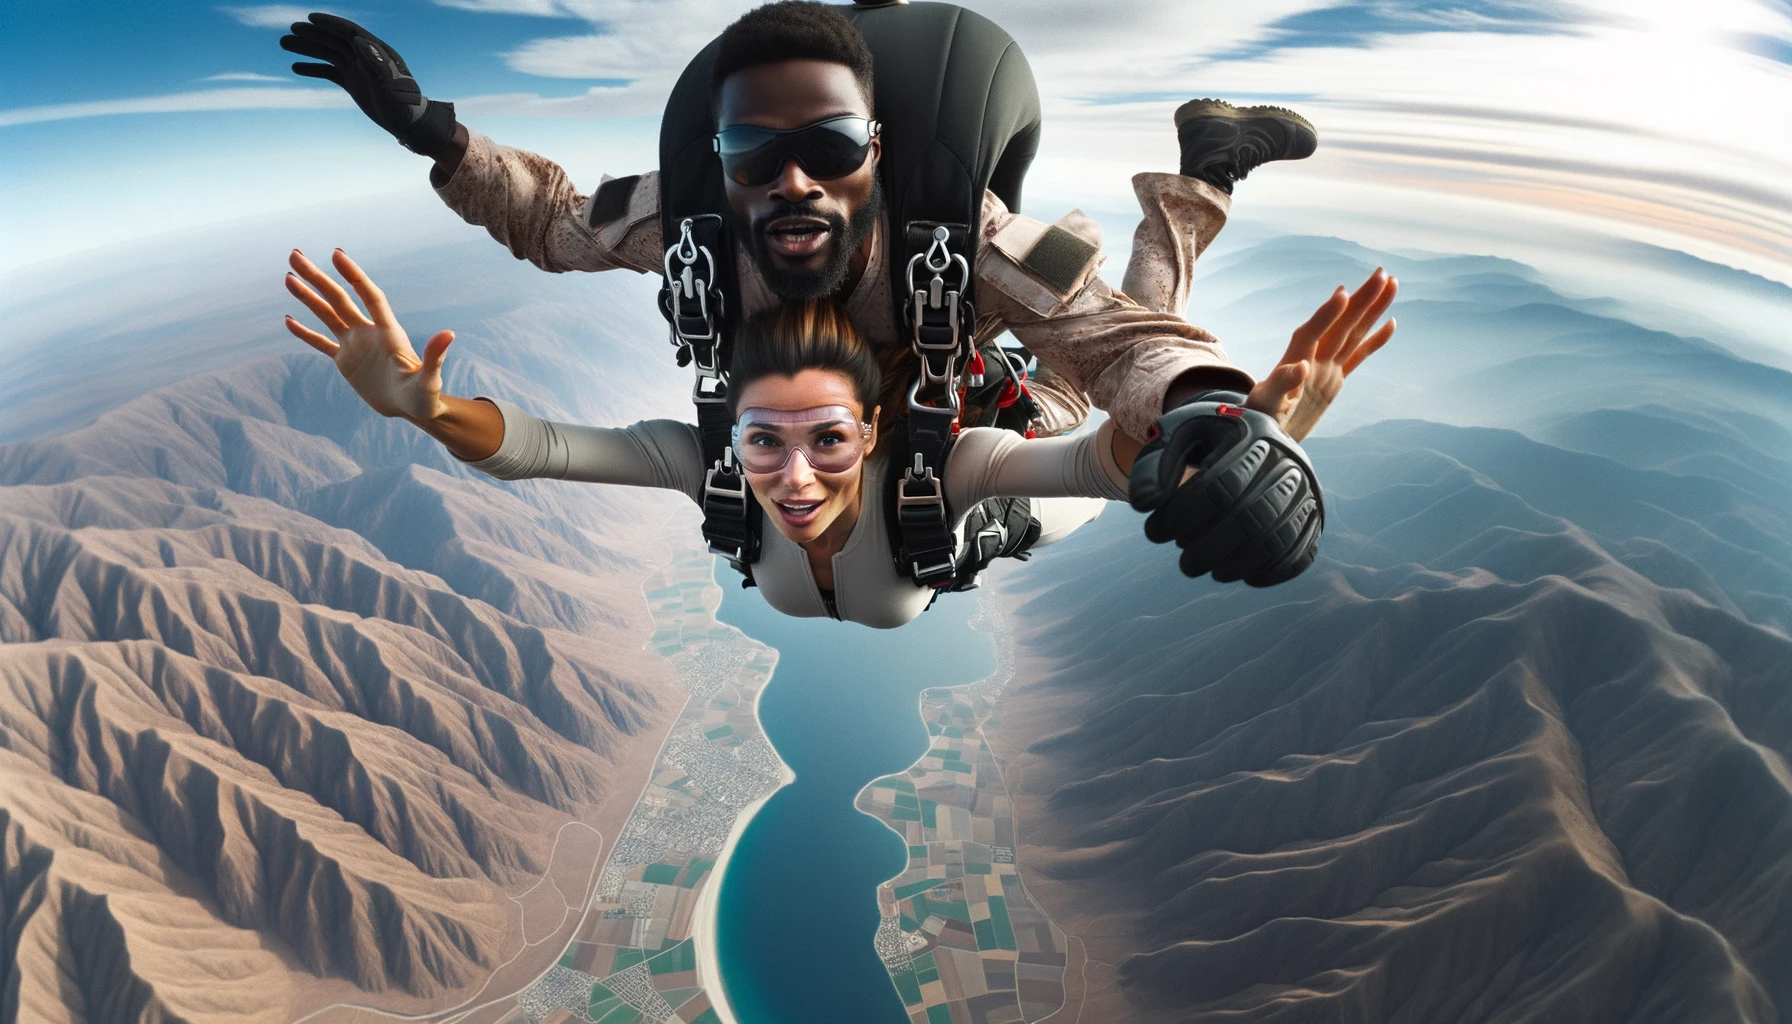 A photograph of a couple skydiving over a scenic landscape. The couple is w